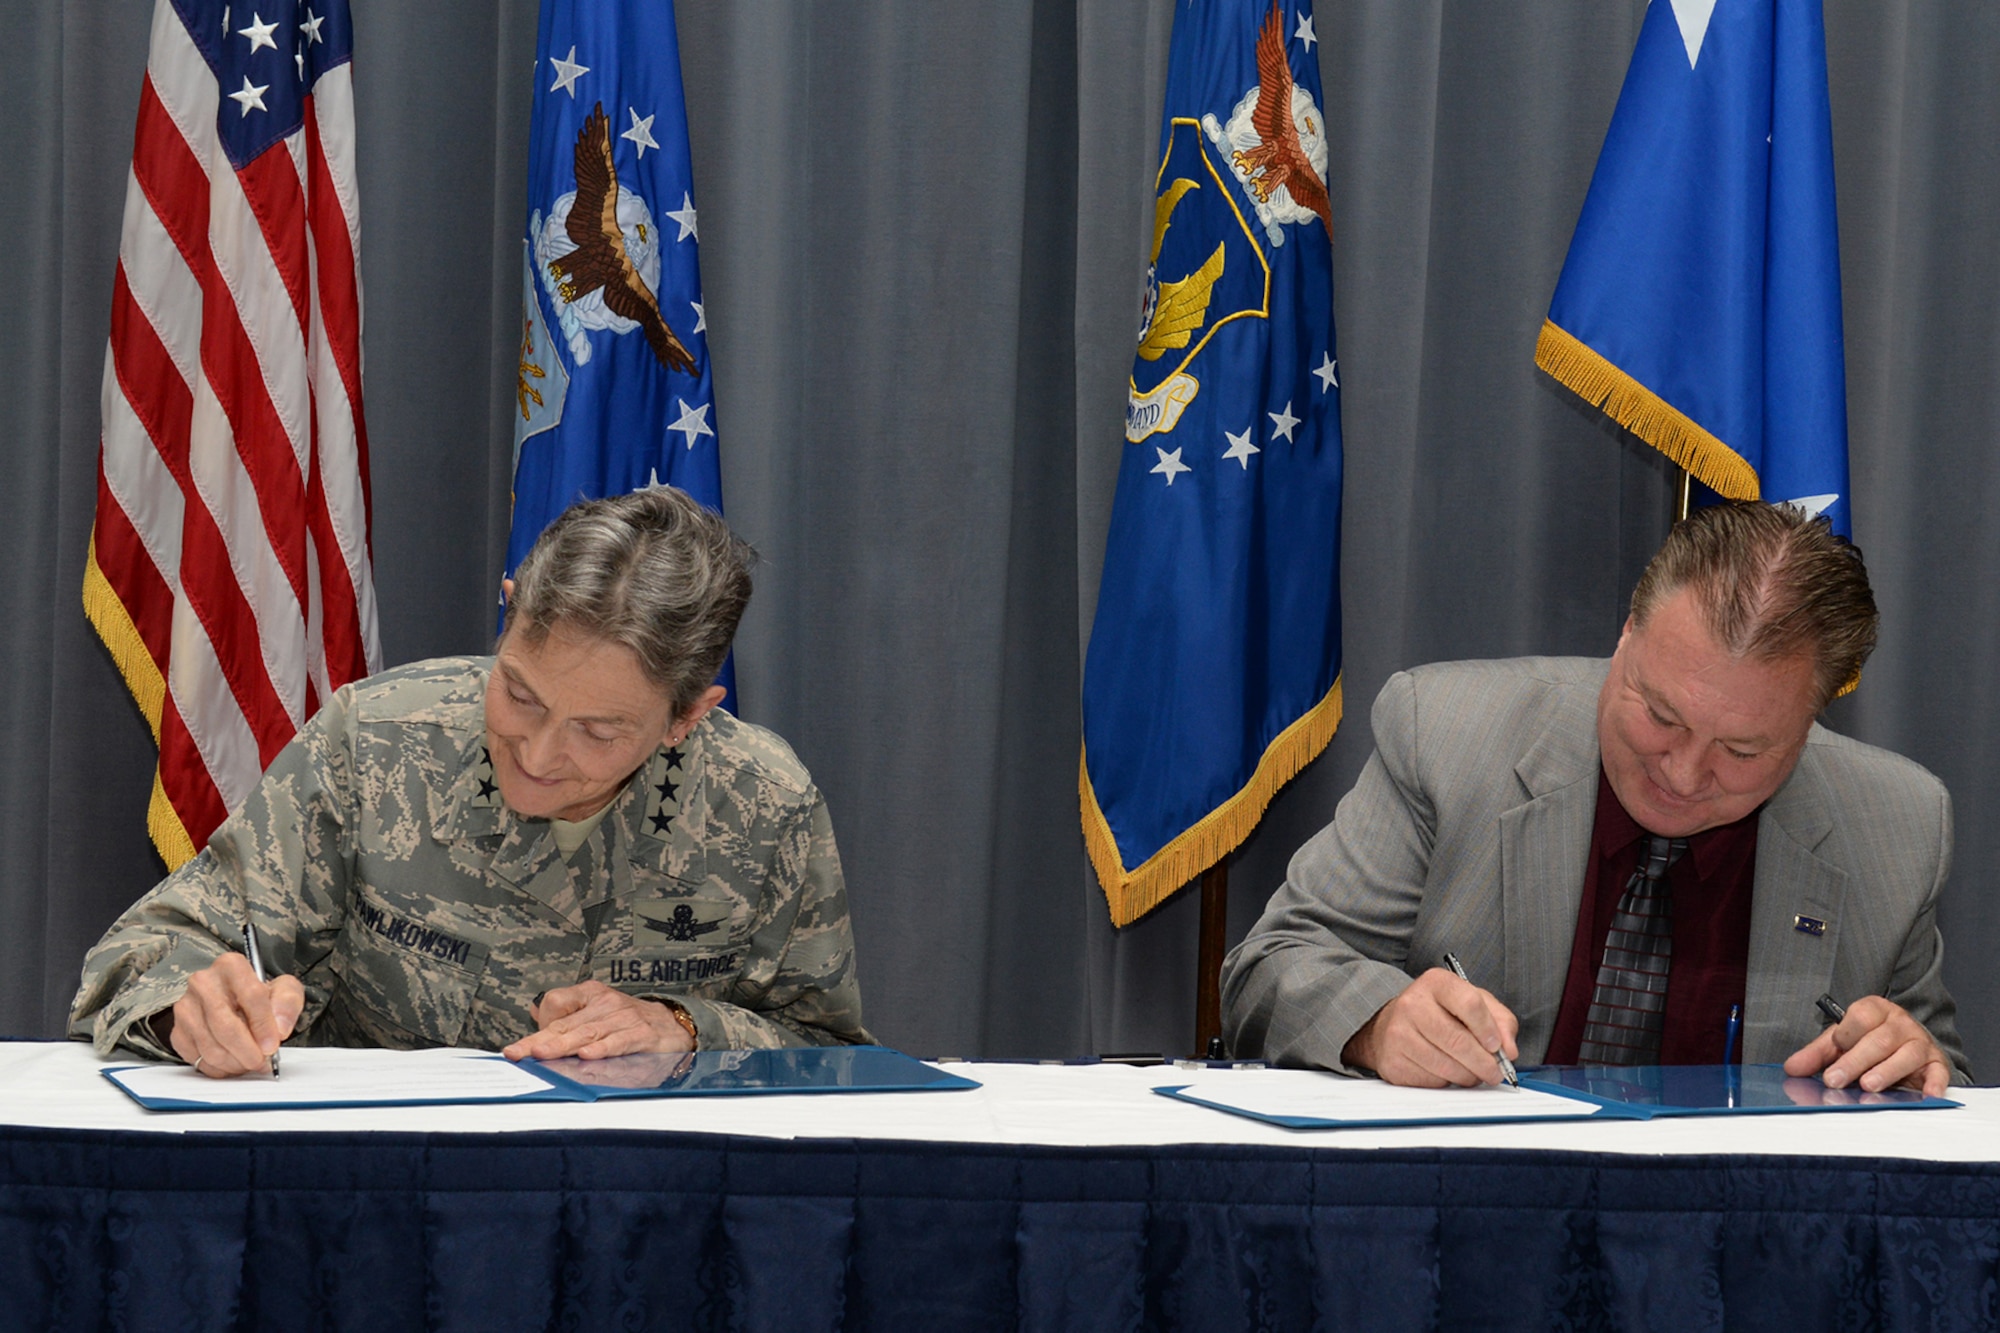 Gen. Ellen M. Pawlikowski, Air Force Materiel Command commander, and Troy Tingey, American Federation of Government Employees Council 214 president, add their signatures to the Master Labor Agreement during a signing ceremony at Headquarters Air Force Materiel Command Aug. 23, 2017. (U.S. Air Force photo/Michelle Gigante)